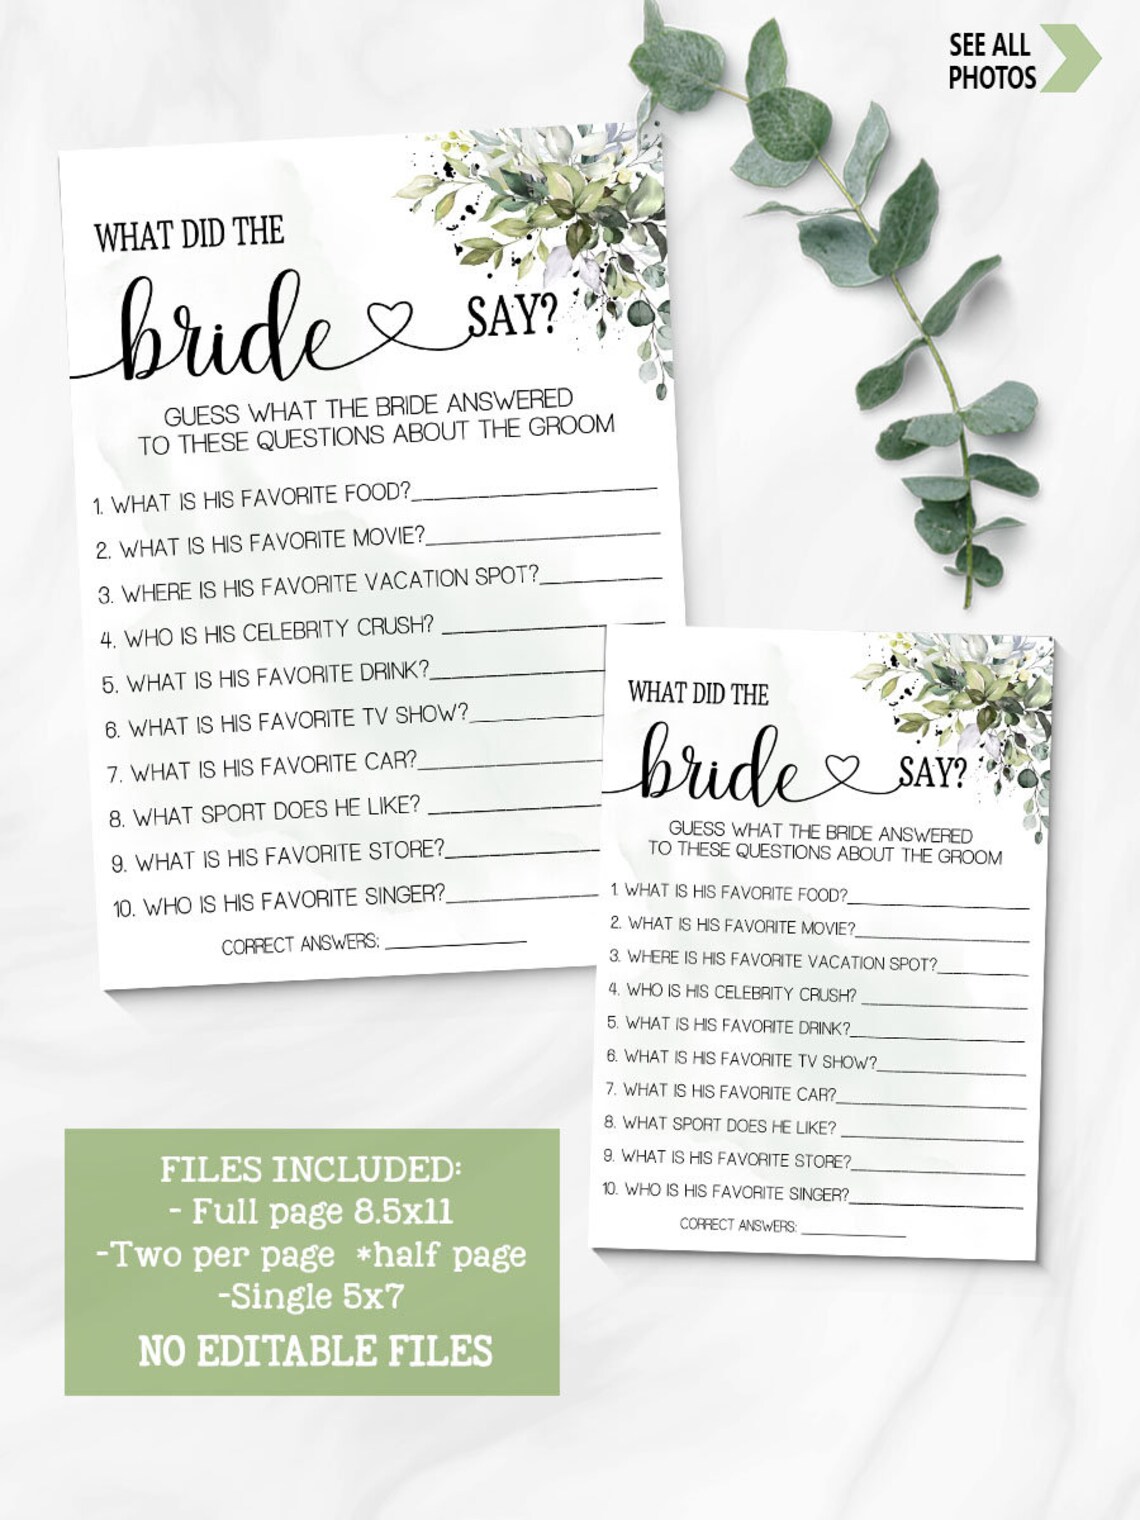 What did the Bride Say bridal shower game greenery | Etsy